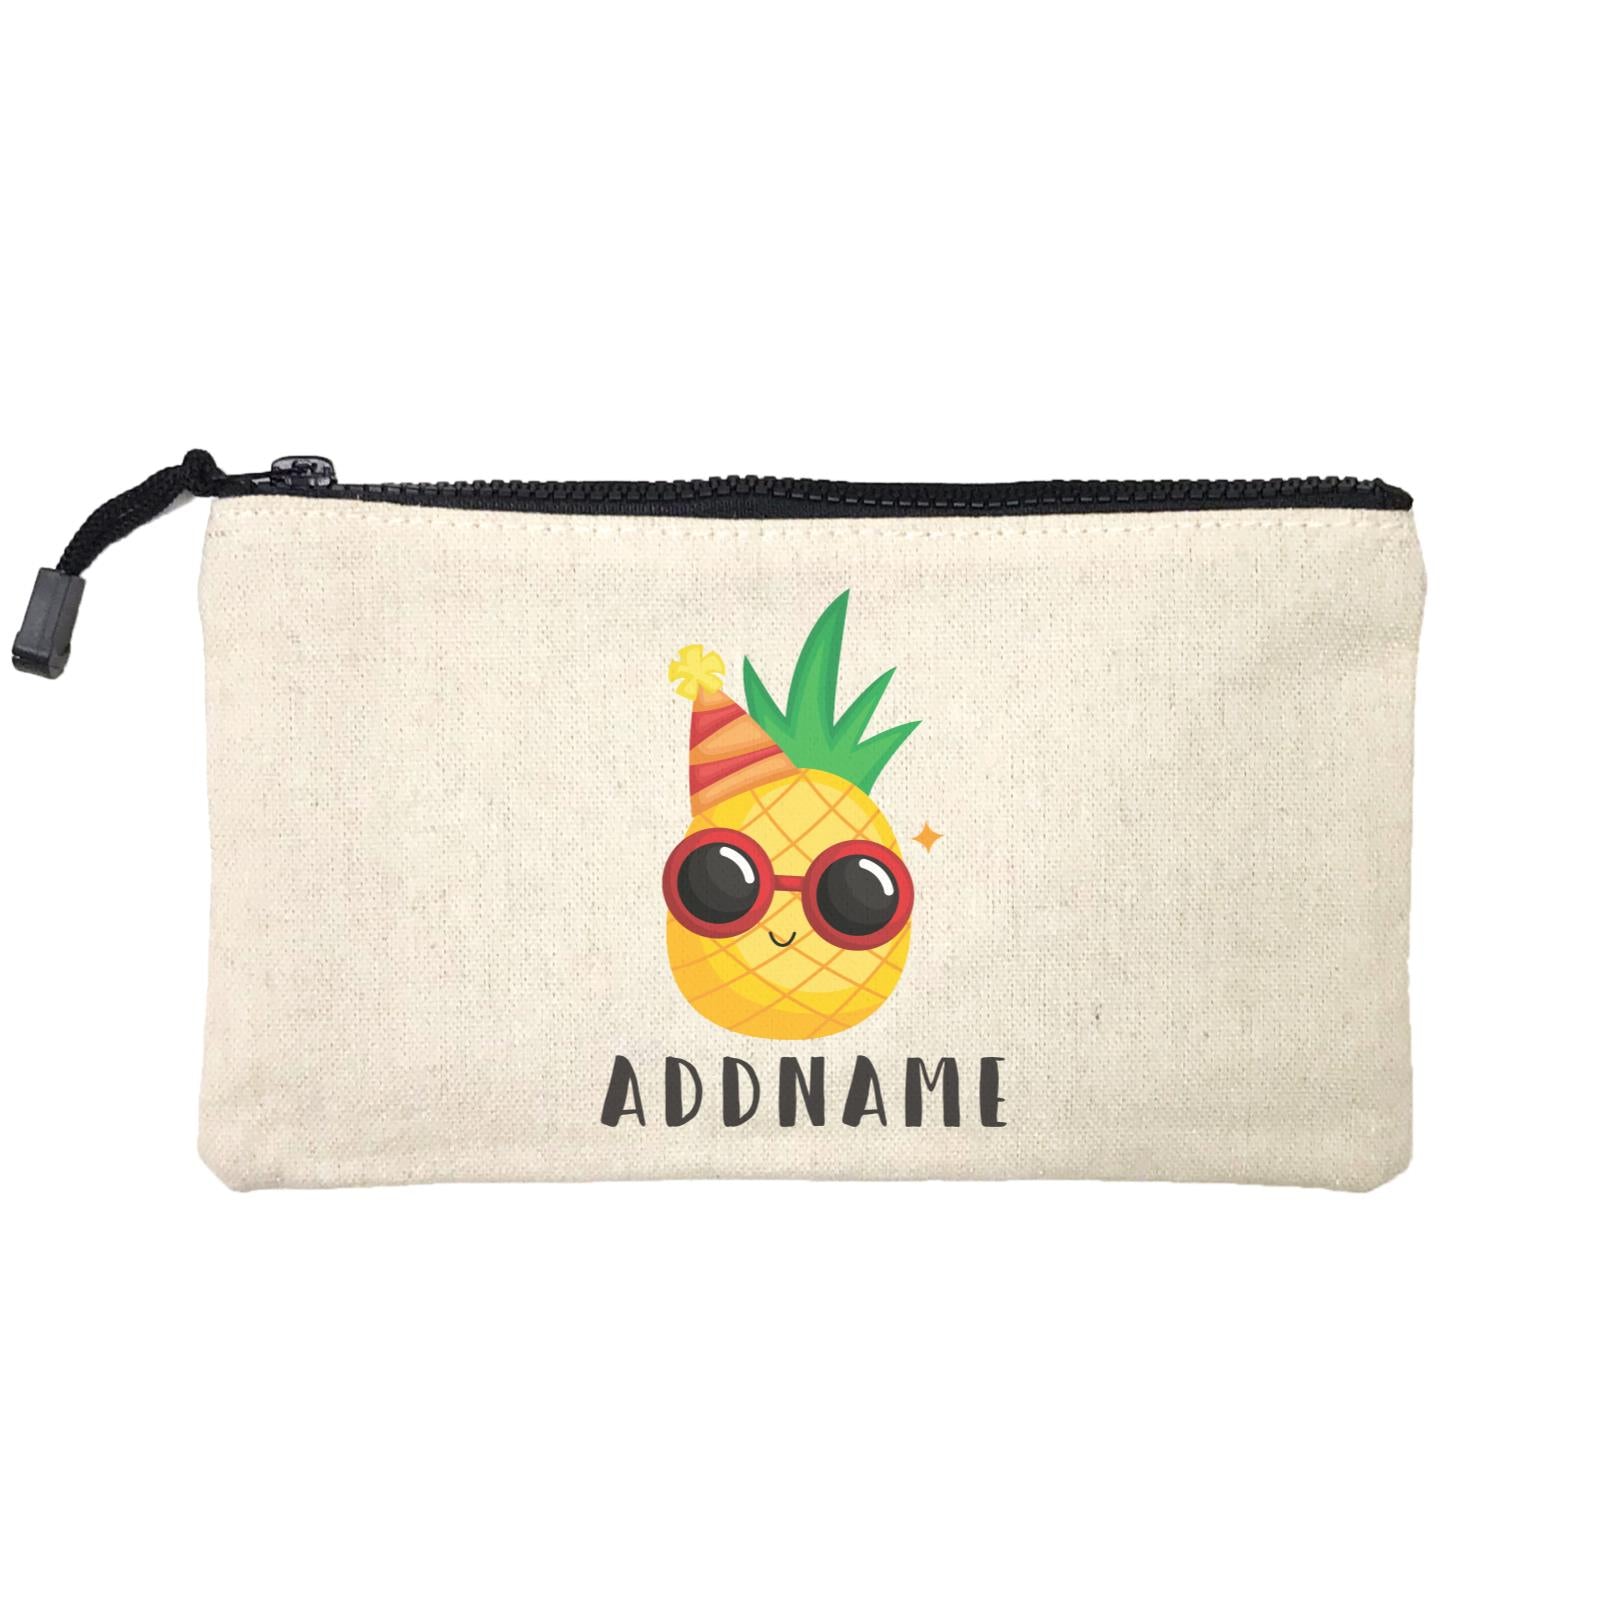 Birthday Hawaii Cool Pineapple Wearing Glasses And Party Hat Addname Mini Accessories Stationery Pouch